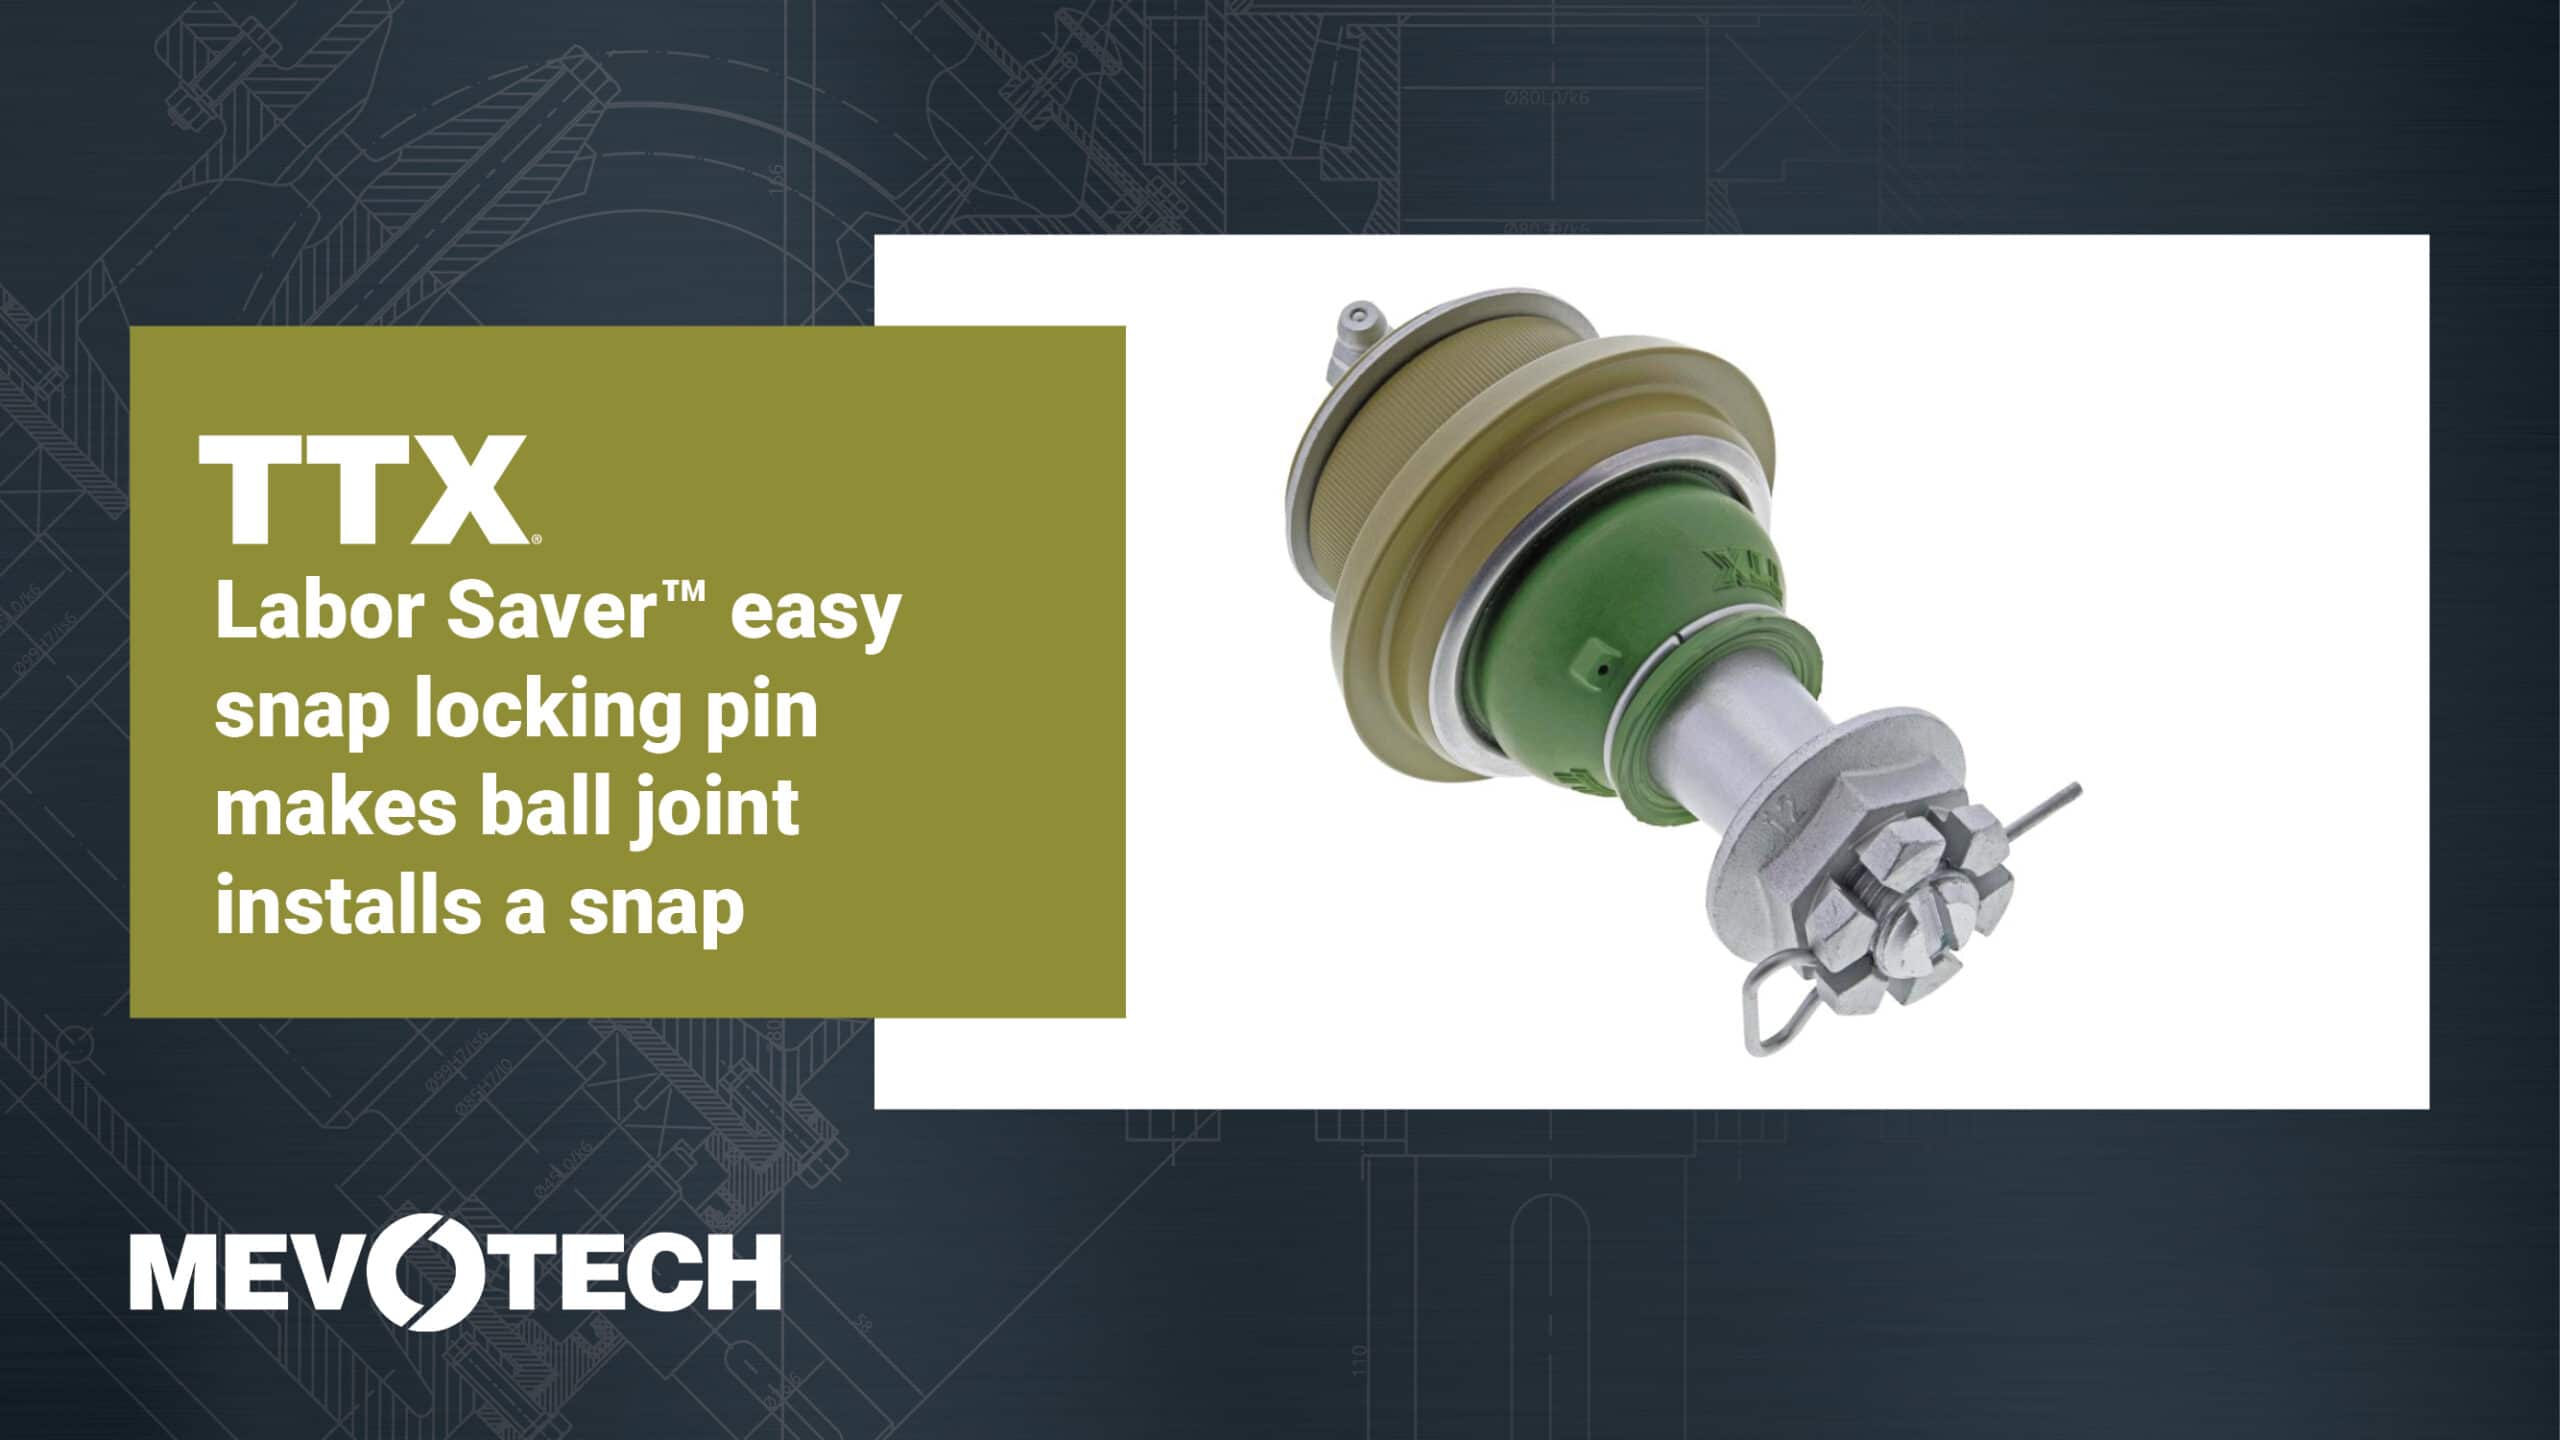 Installation is Faster & Easier with our Labor Saver Tools - Mevotech